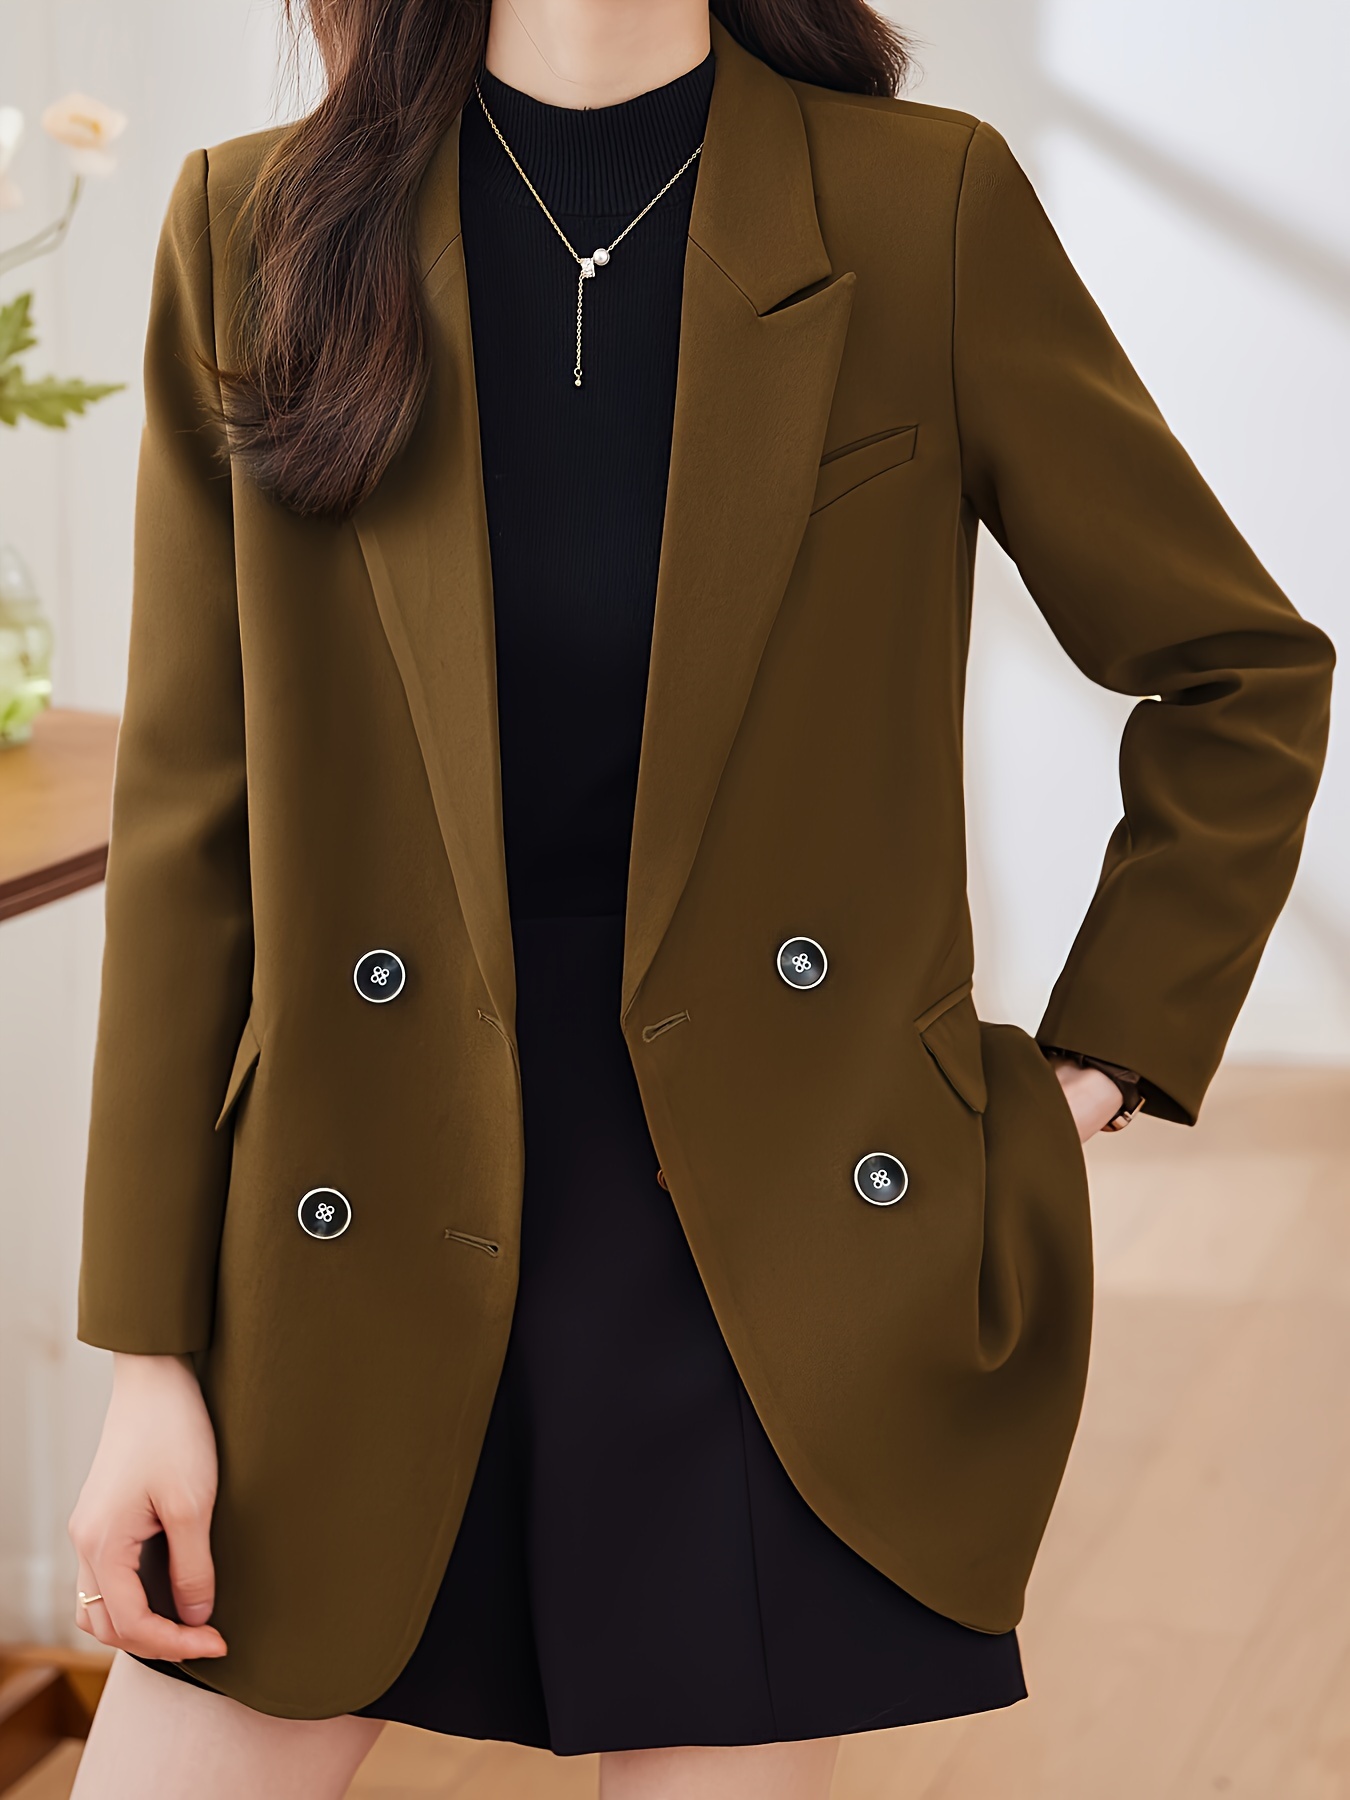 Single Breasted Lapel Blazer, Casual Solid Open Front Work Office Outerwear, Women’s Clothing